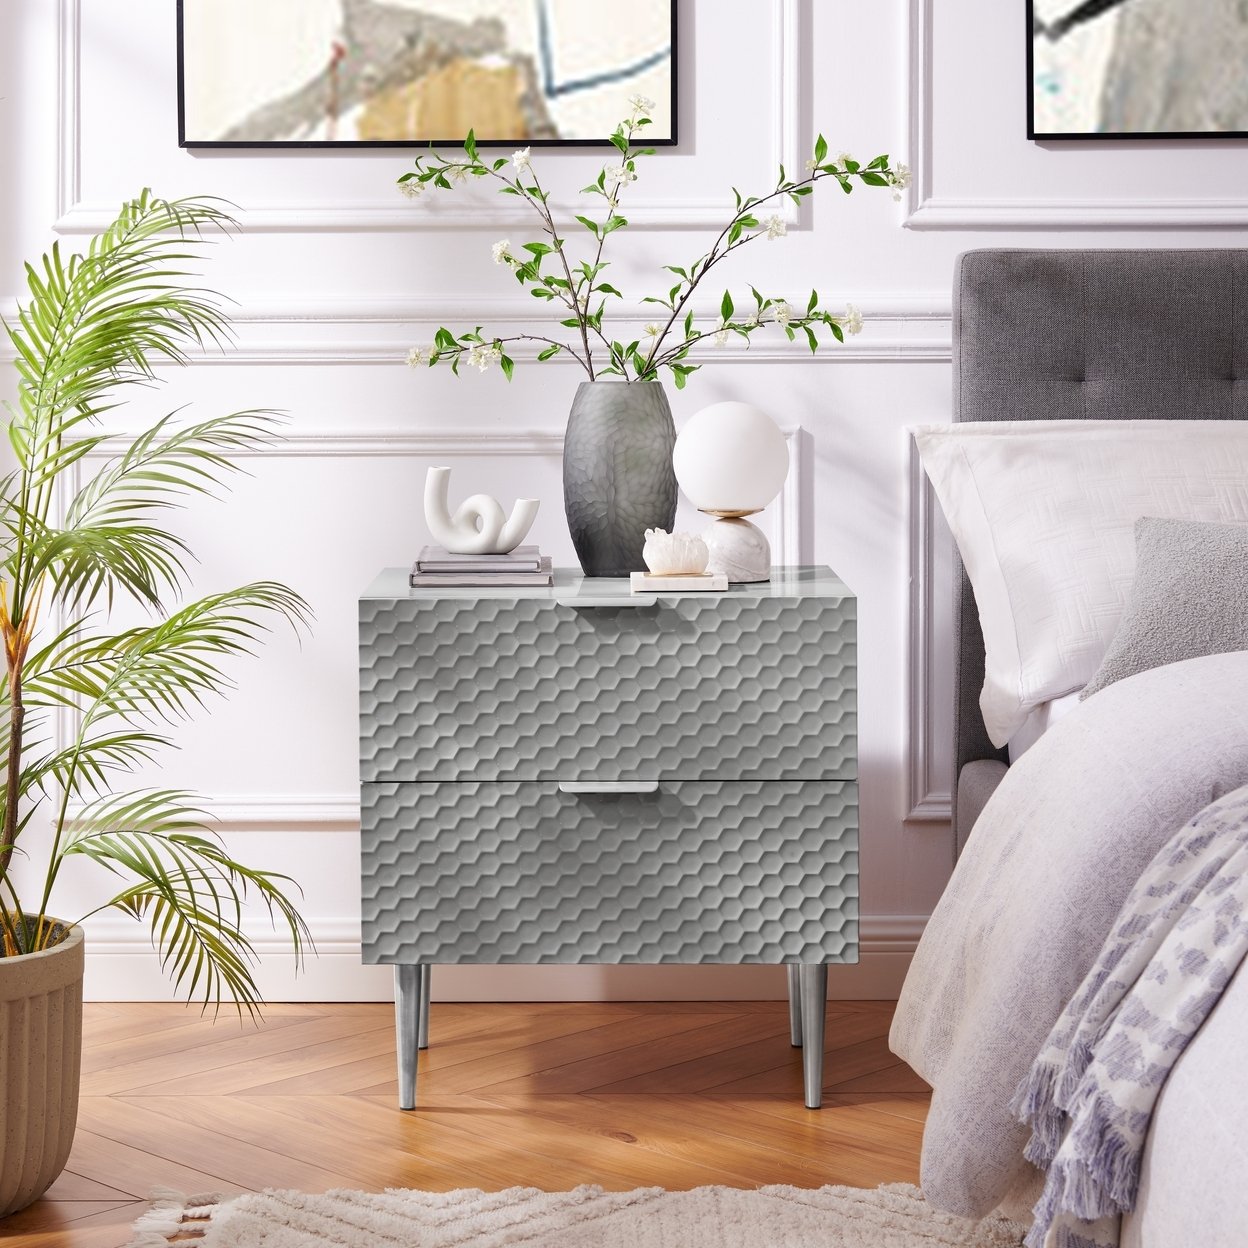 Bram Table - 2 Drawers, Tapered Legs, Lacquer Finish, Minimalist Drawer Pulls, Geometric Textured Drawer Face - Grey/chrome